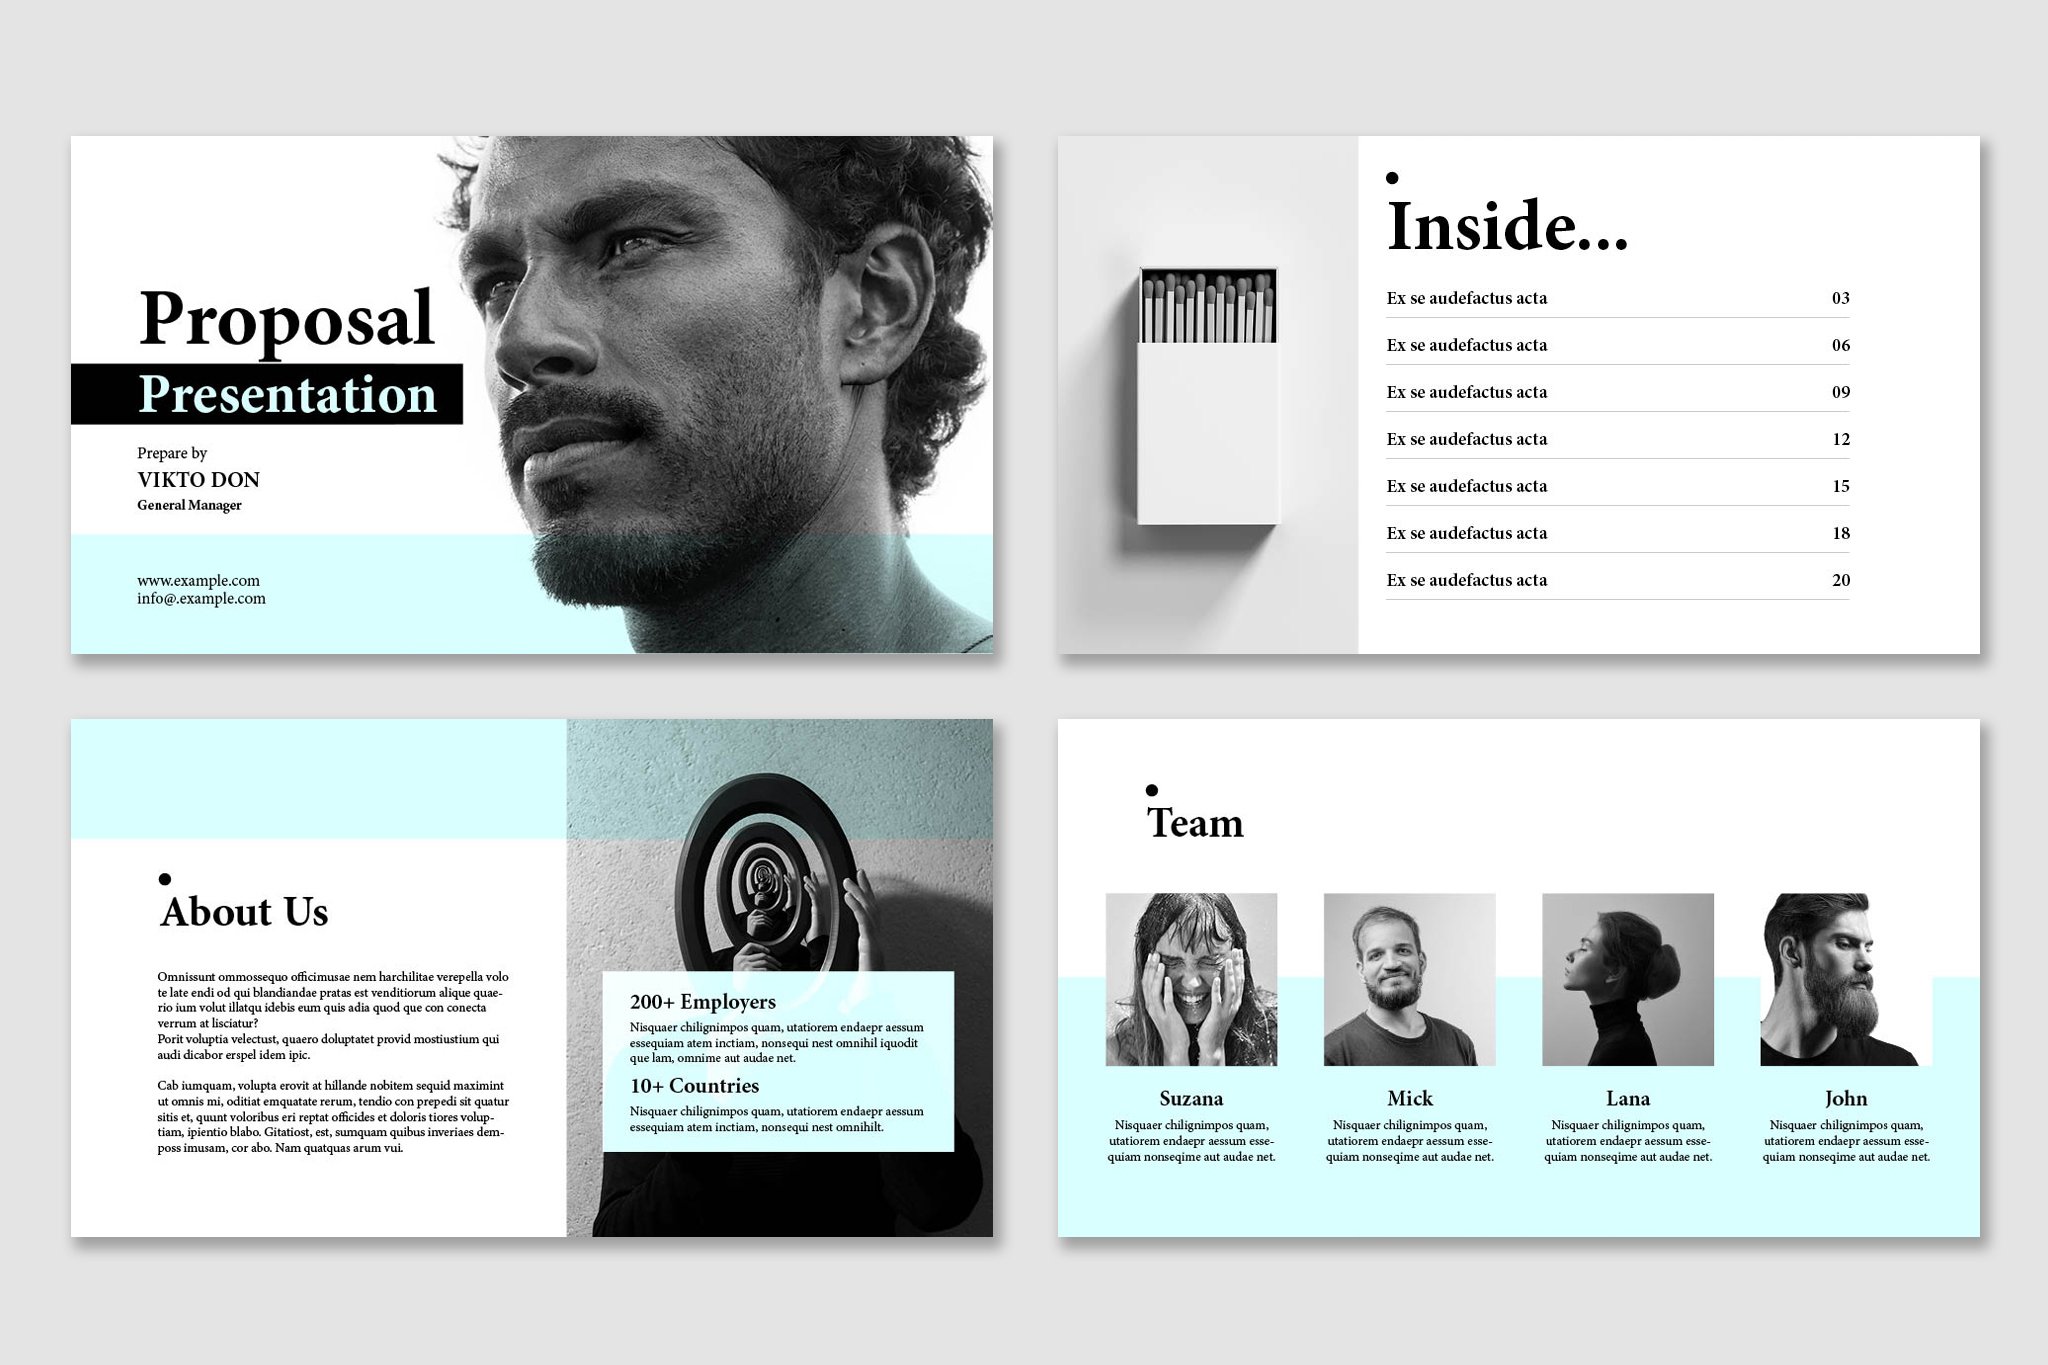 indesign display master content in front of page content